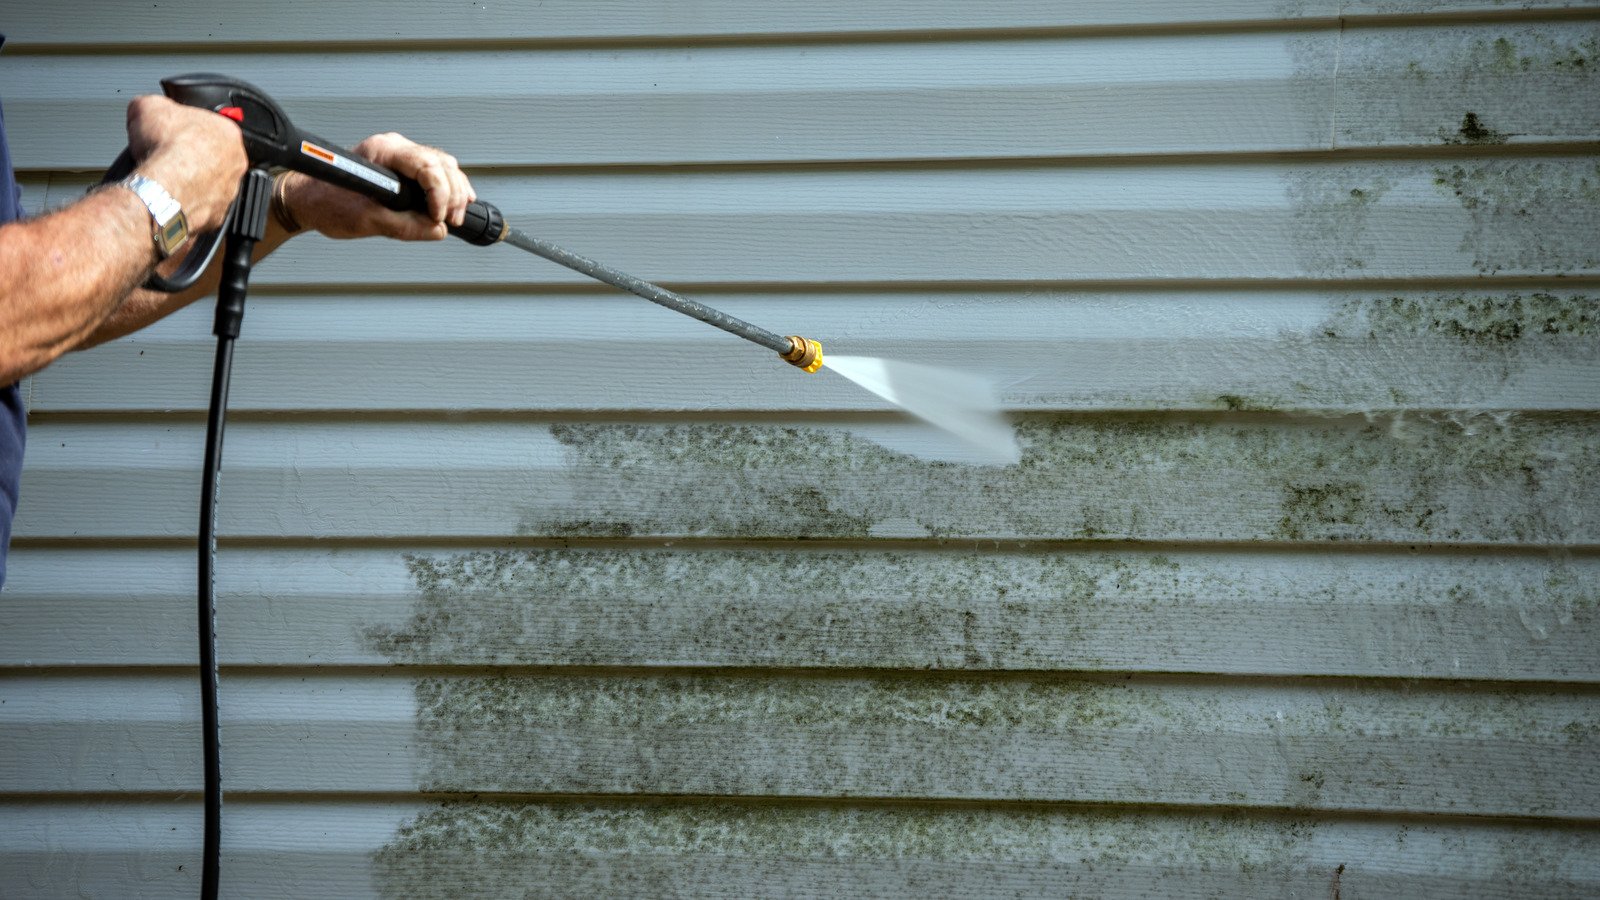 20 Incredibly Satisfying Pressure Washing Before And After Photos